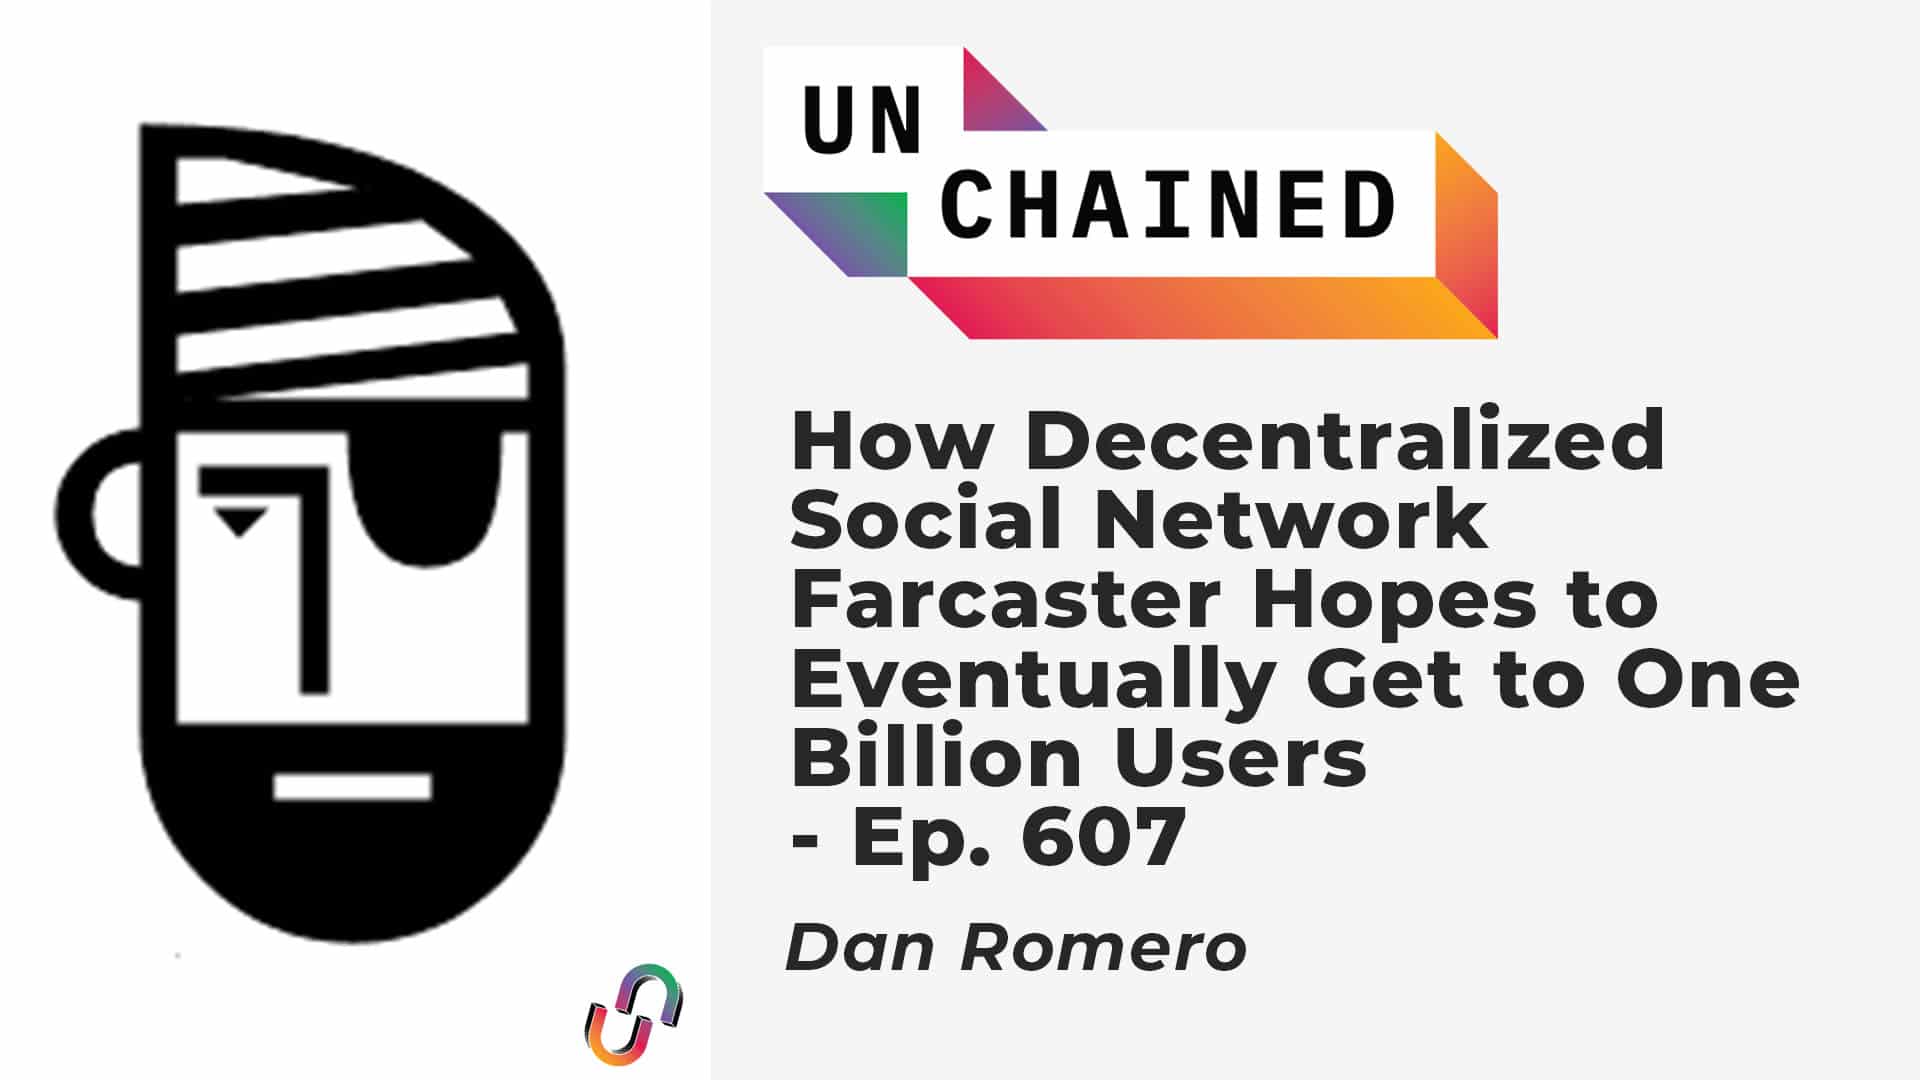 How Decentralized Social Network Farcaster Hopes to Eventually Get to One Billion Users - Ep. 607